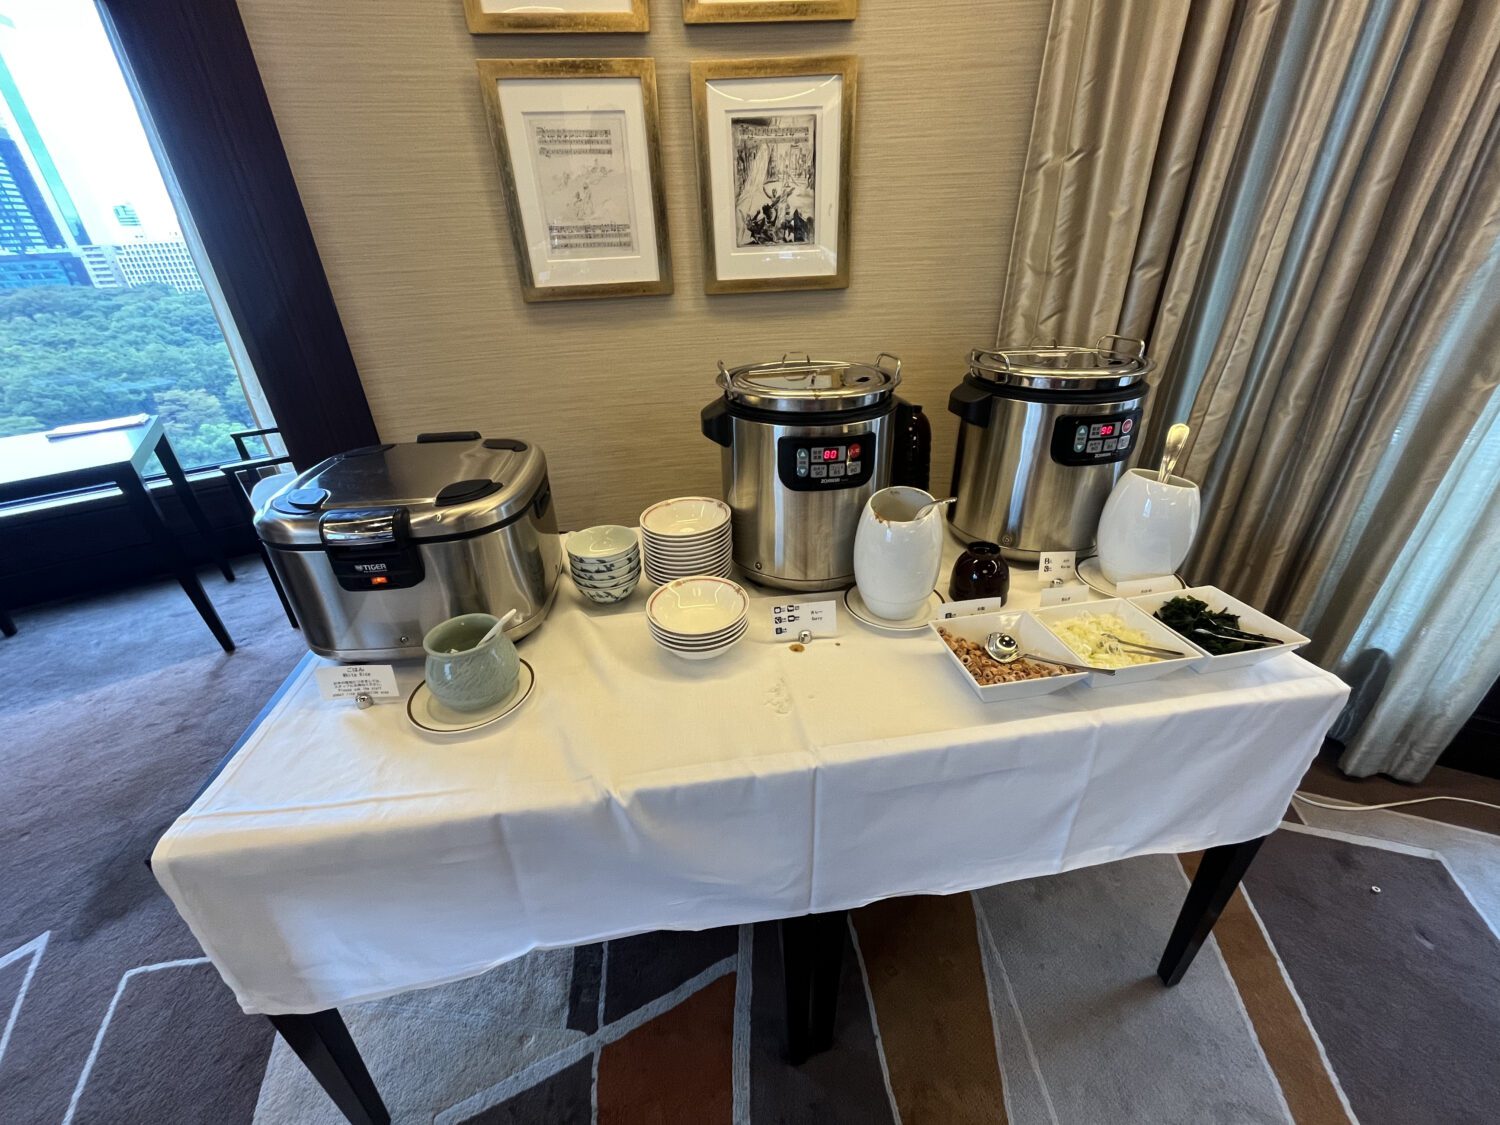 miso soup and curry table at breakfast